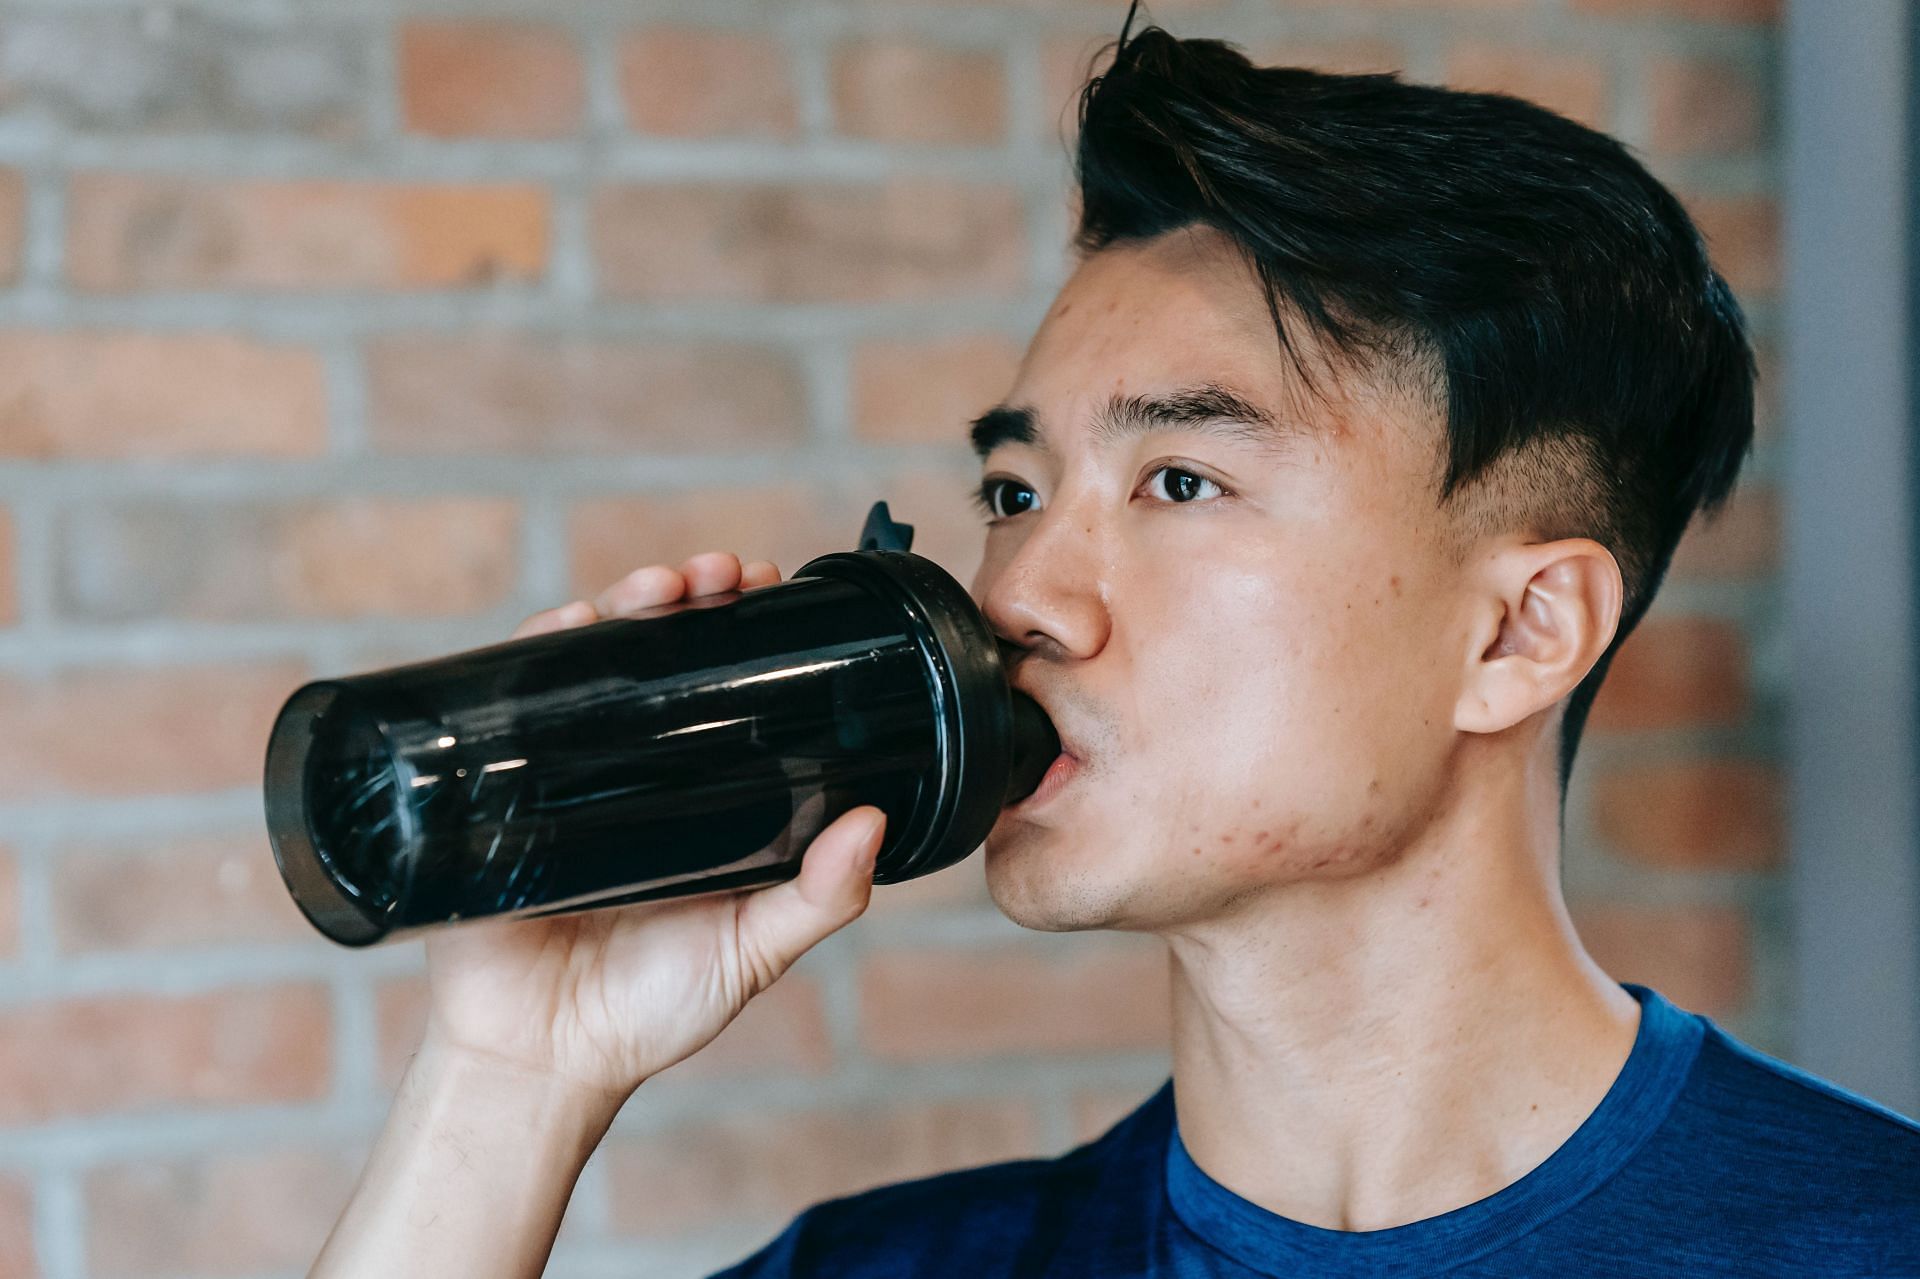 Main objective of pre-workout supplements is to maximize your workout. (Image via Pexels/ Andres Ayrton)